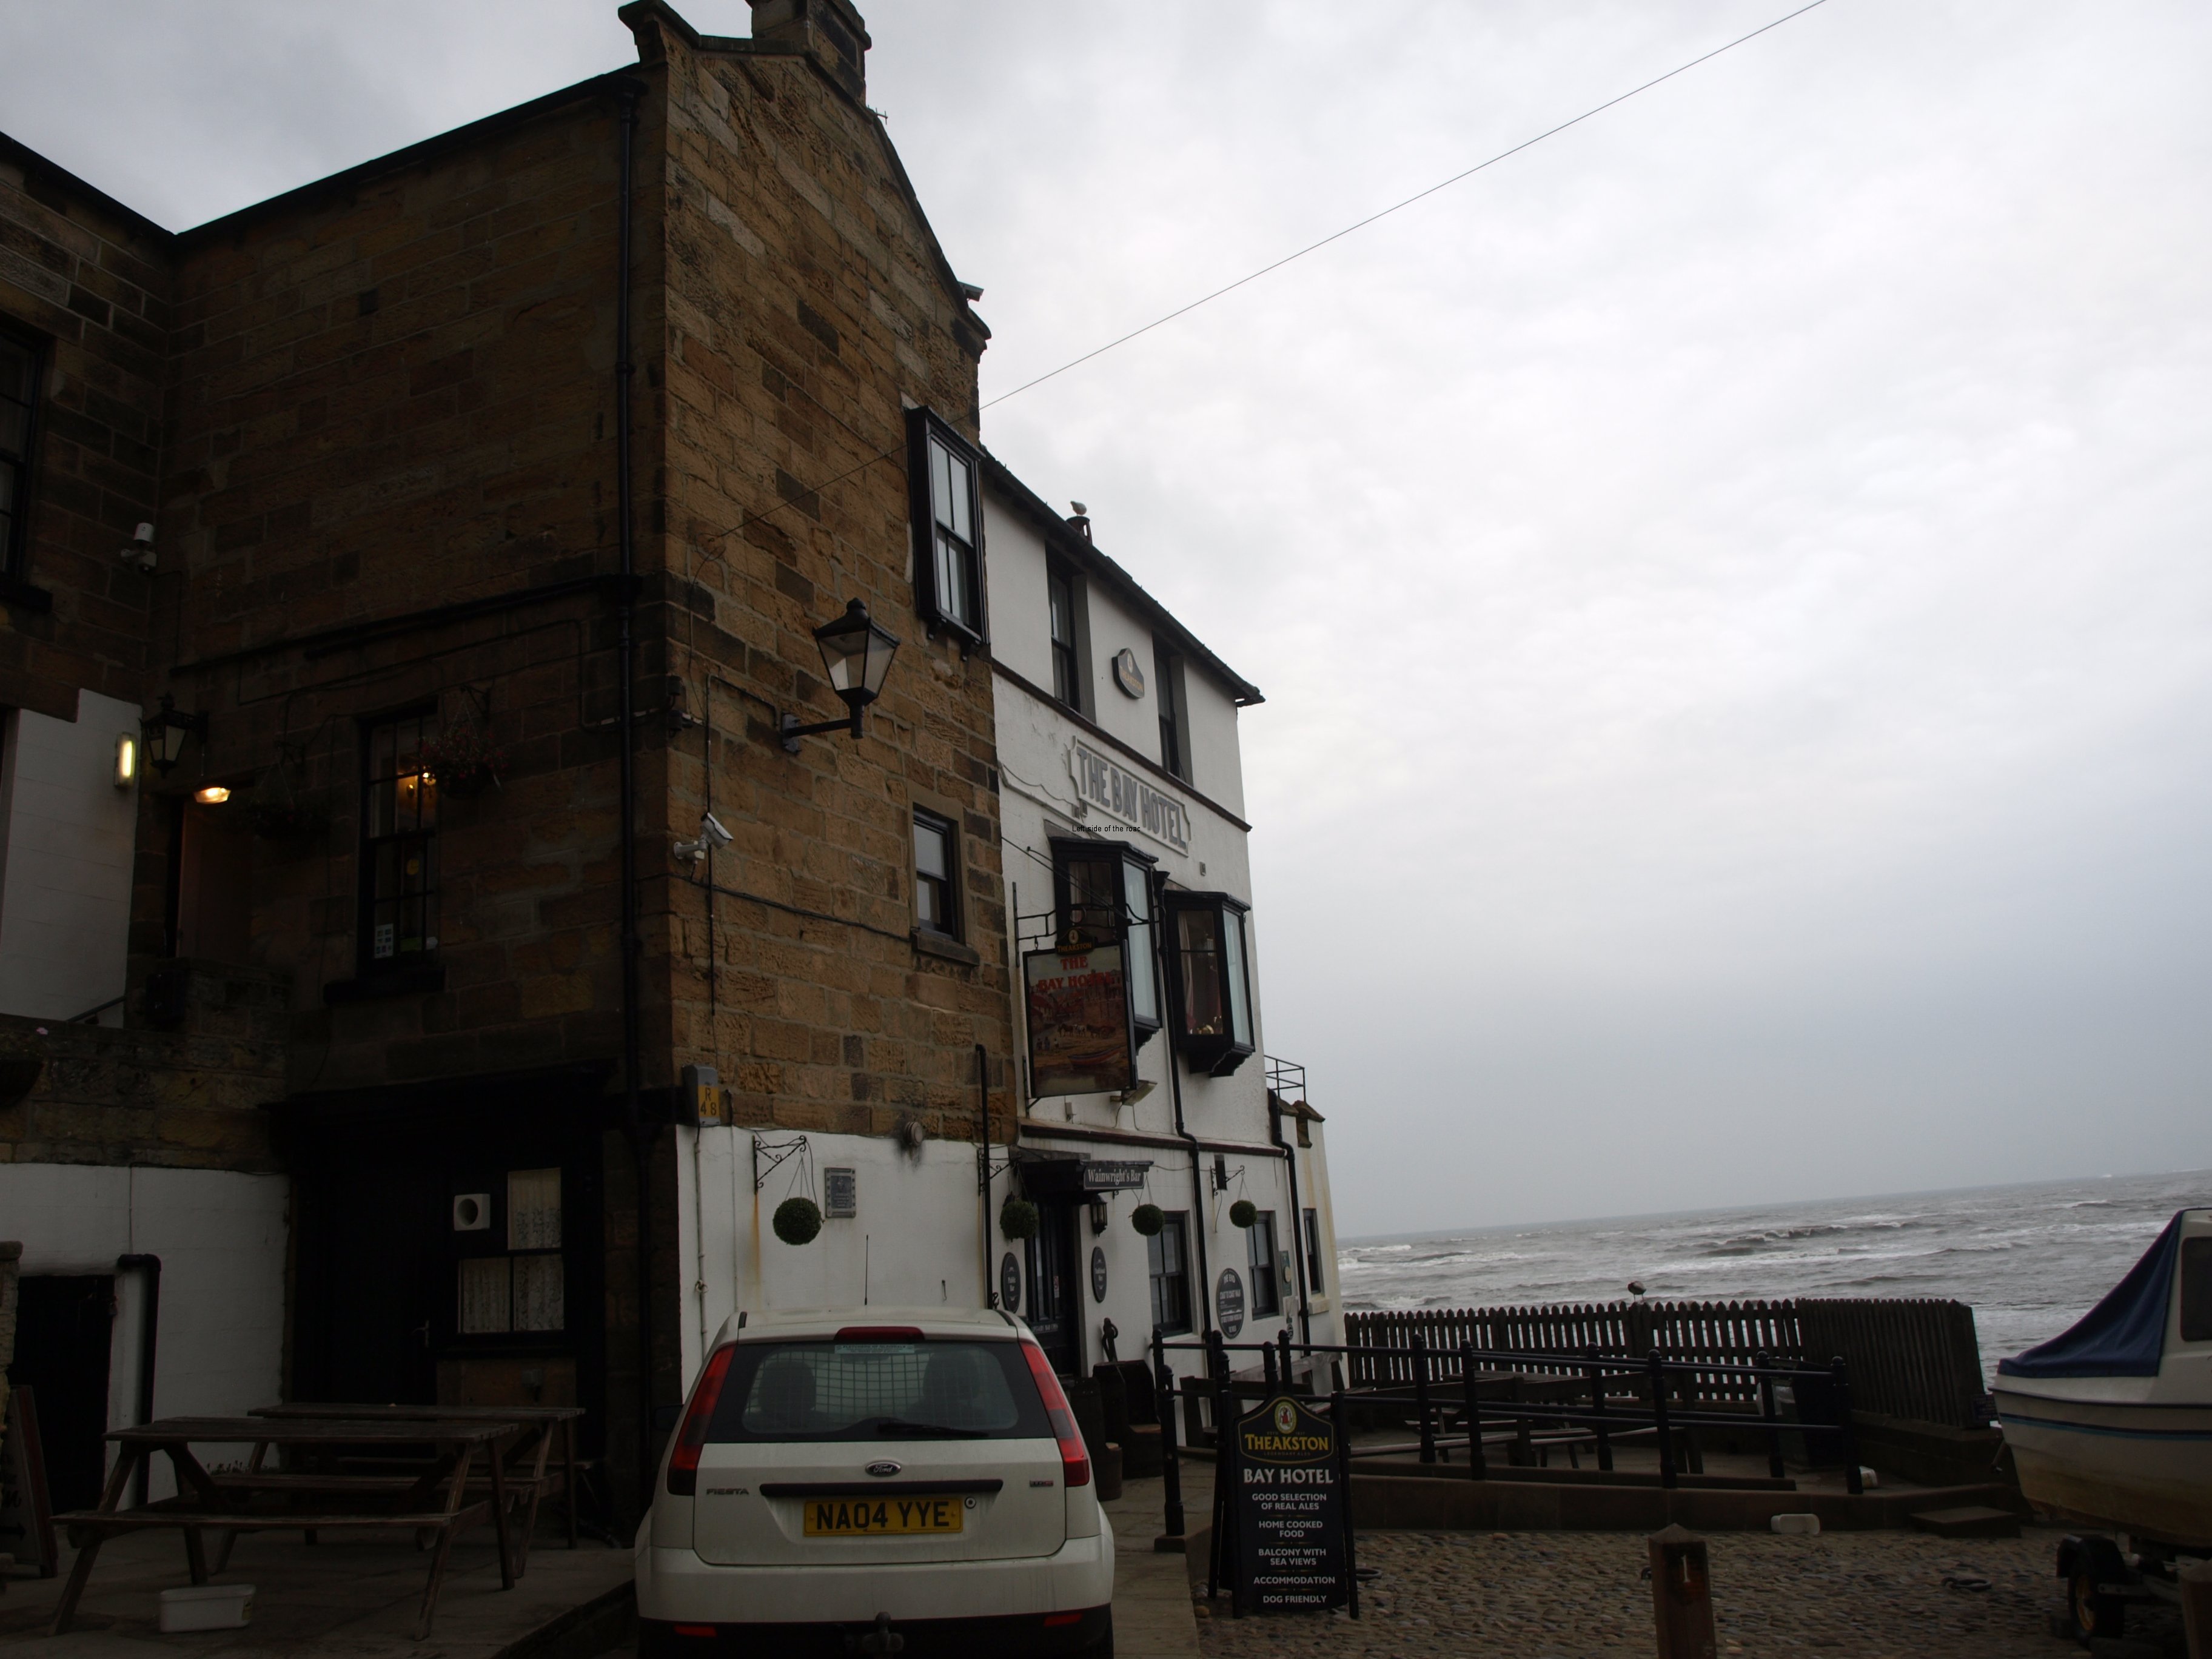 Glaisdale to Robin Hood's Bay